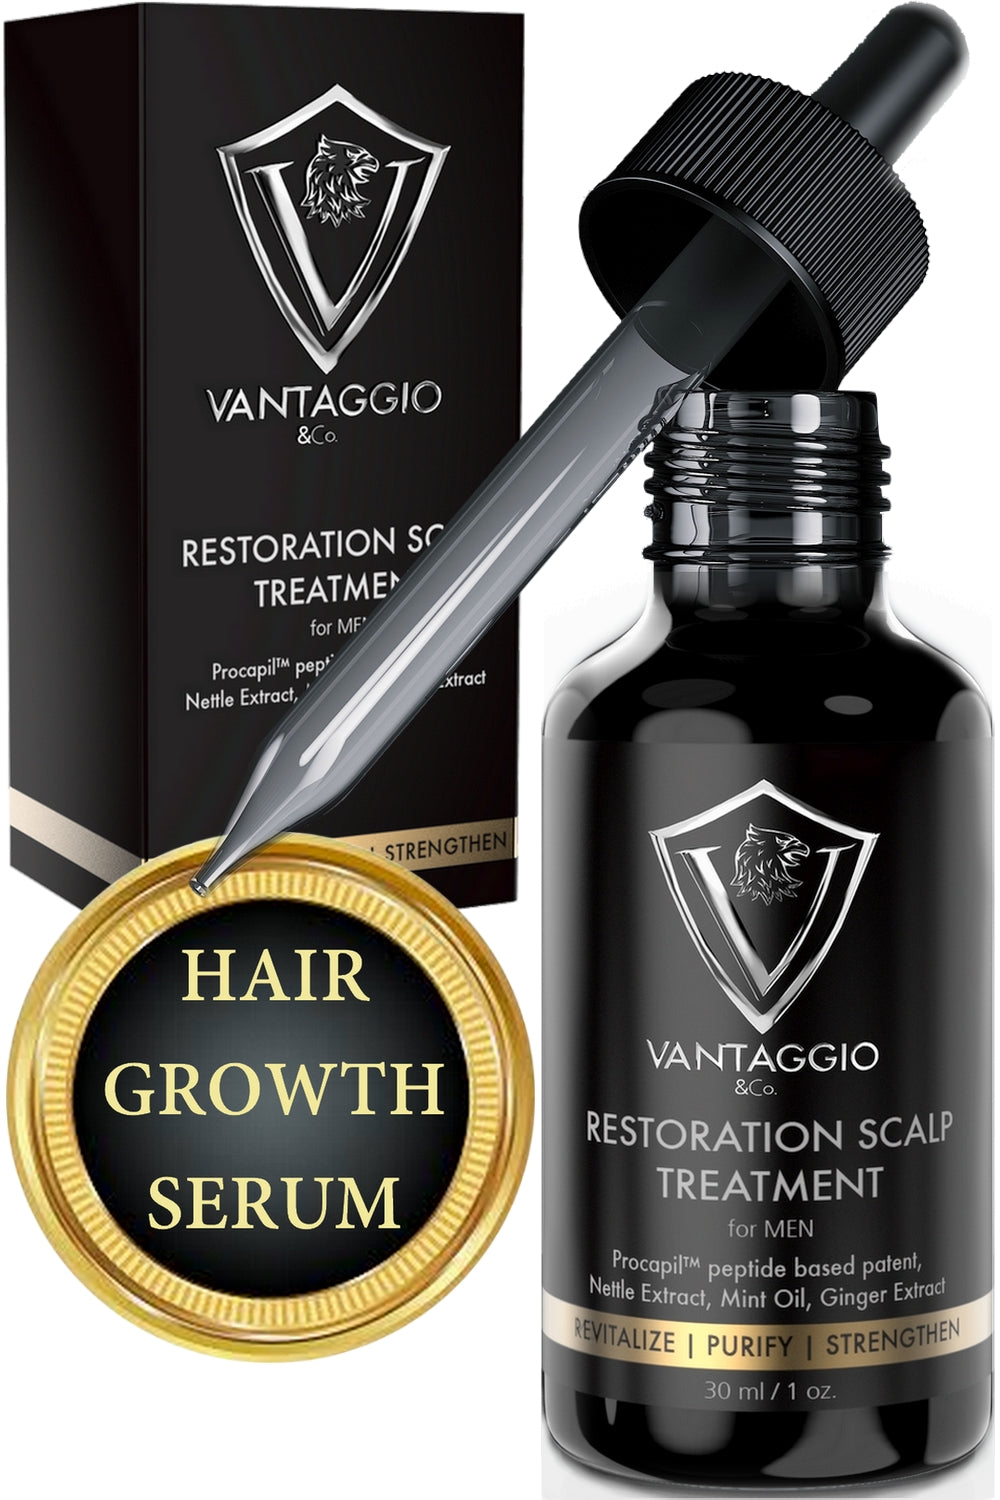 Hair Growth Serum and Scalp Treatment - Hair Loss Treatments for Men – Thickening DHT Blocker Fight Thinning and Alopecia - Contains Ginger Castor Oil Aloe Vera and Peppermint - 1oz